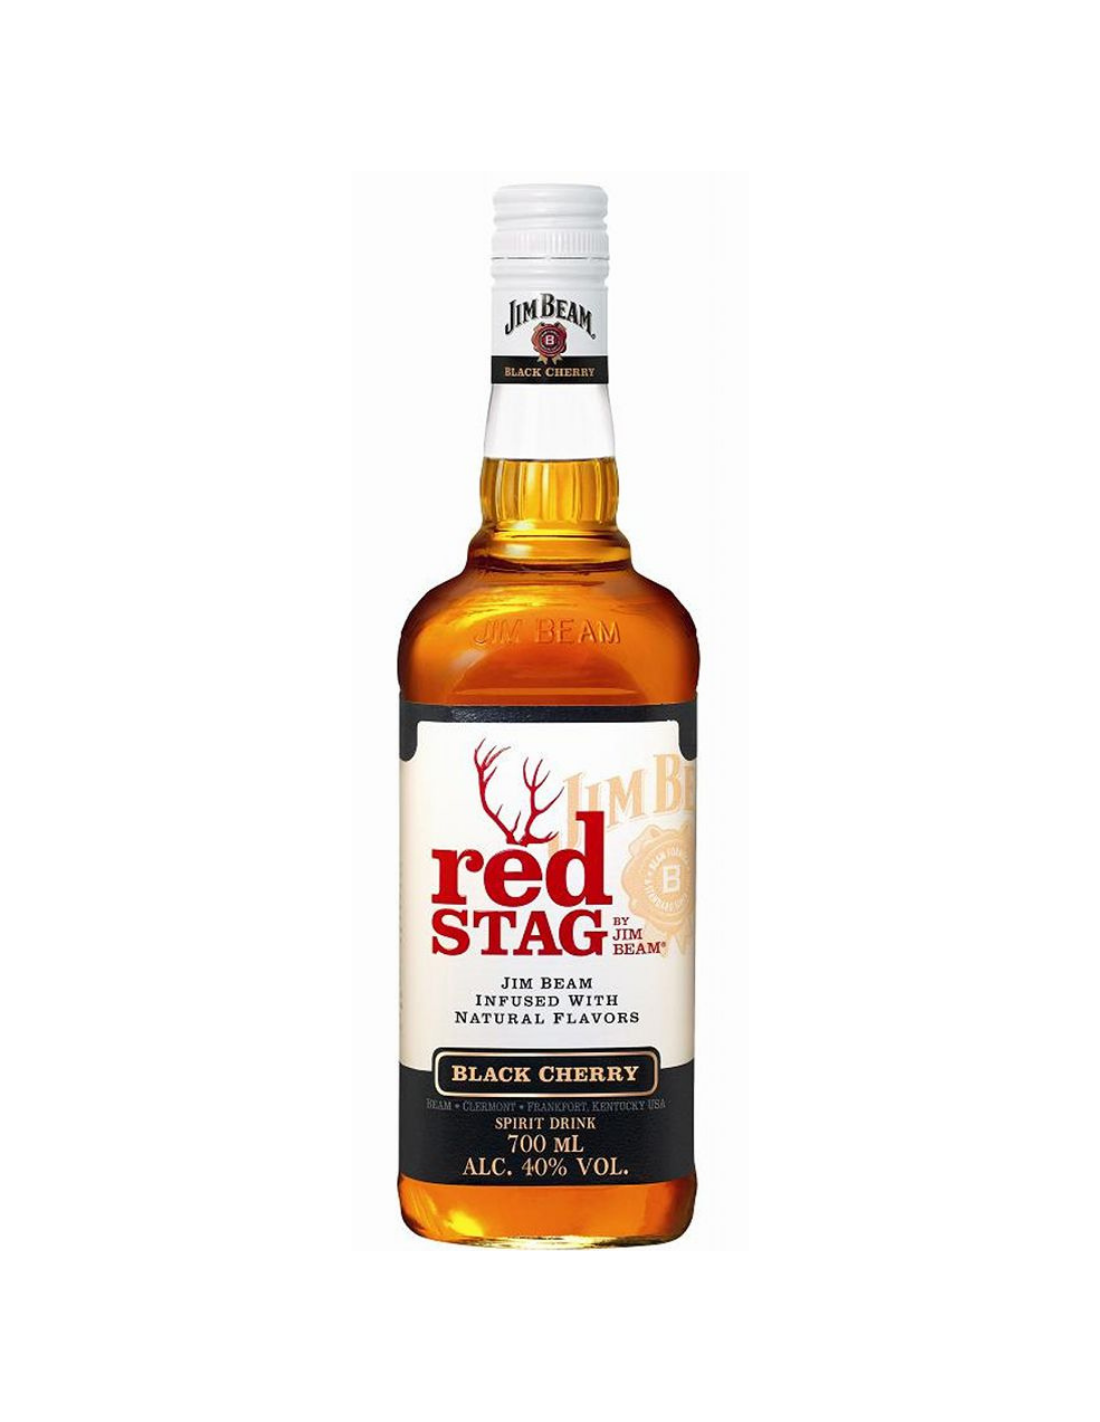 Whisky Jim Beam Red Stag Black Cherry, 0.7L, 40% alc., SUA alcooldiscount.ro